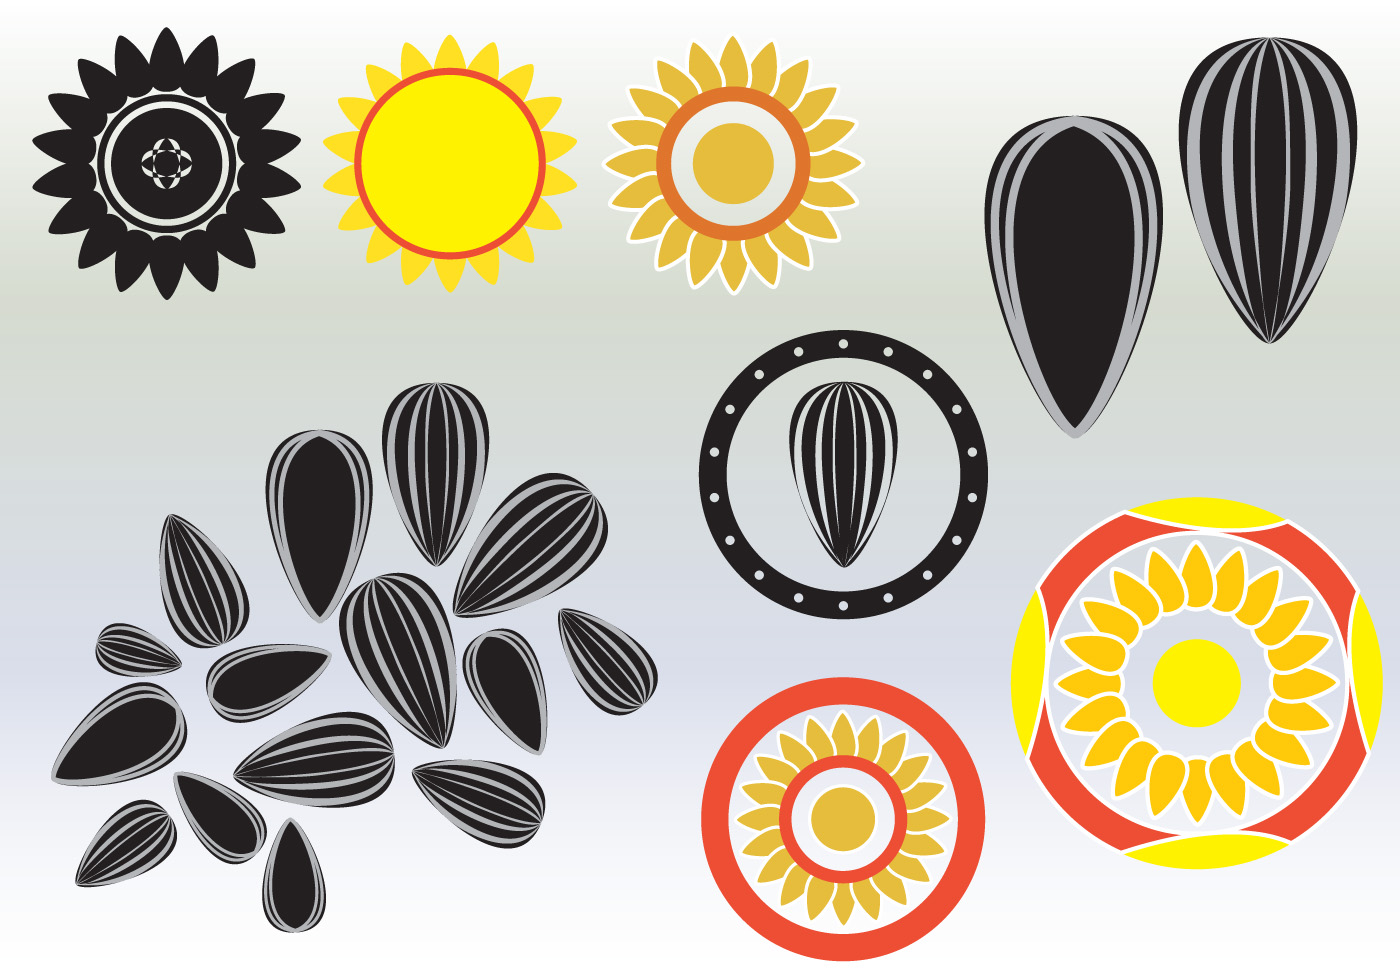 Sunflower Seed Vectors - Download Free Vector Art, Stock Graphics & Images